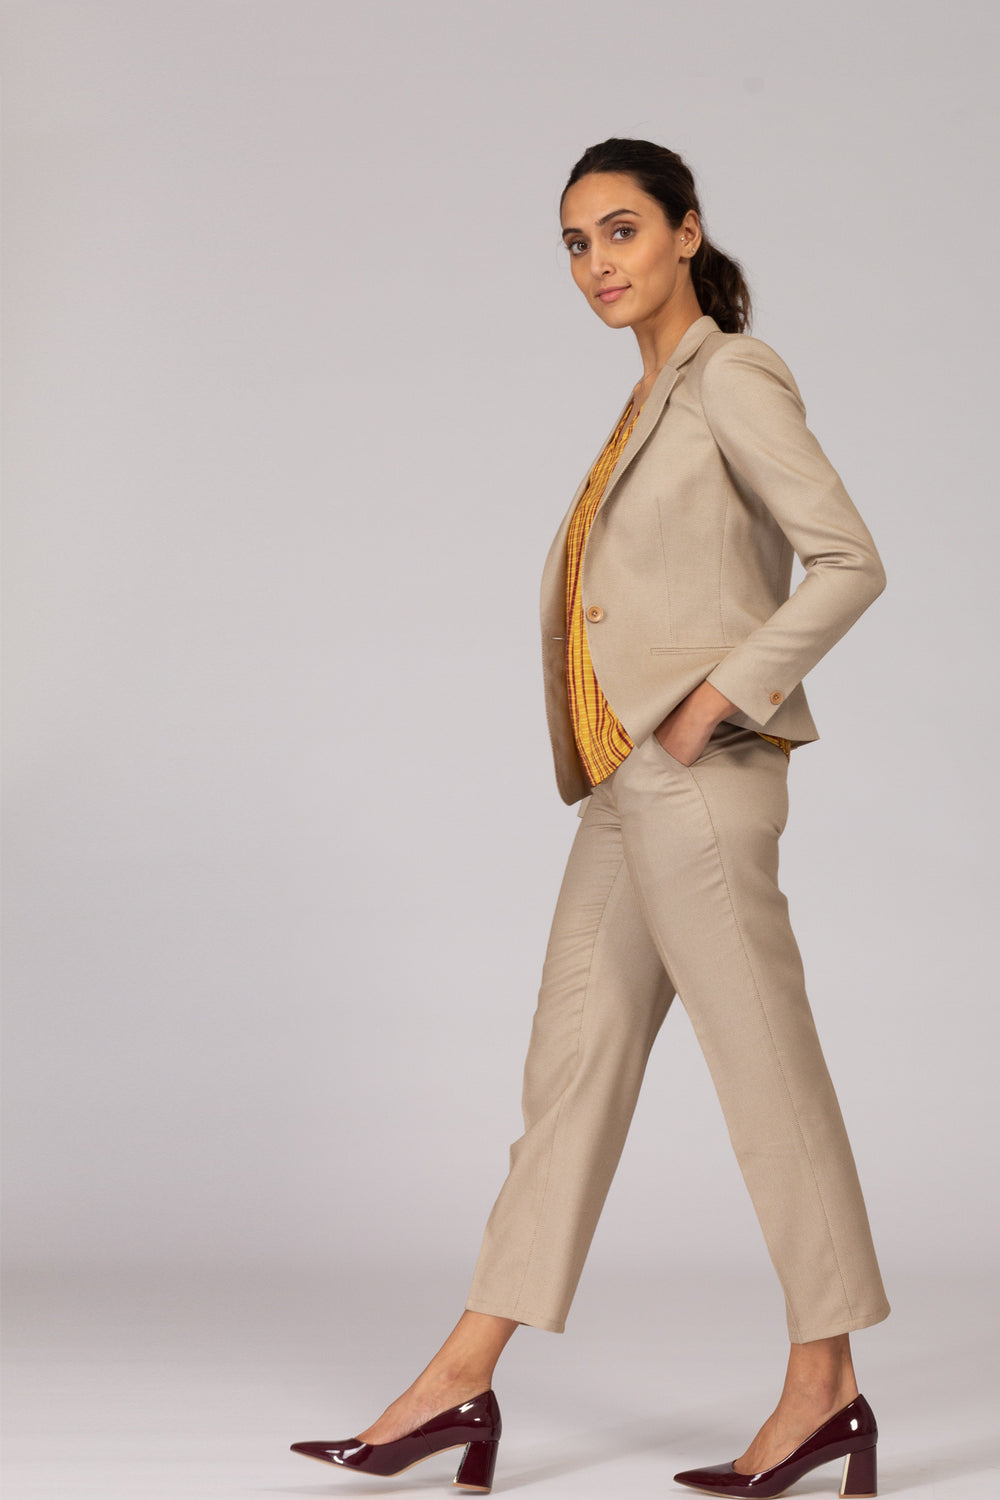 Grey Formal Trousers